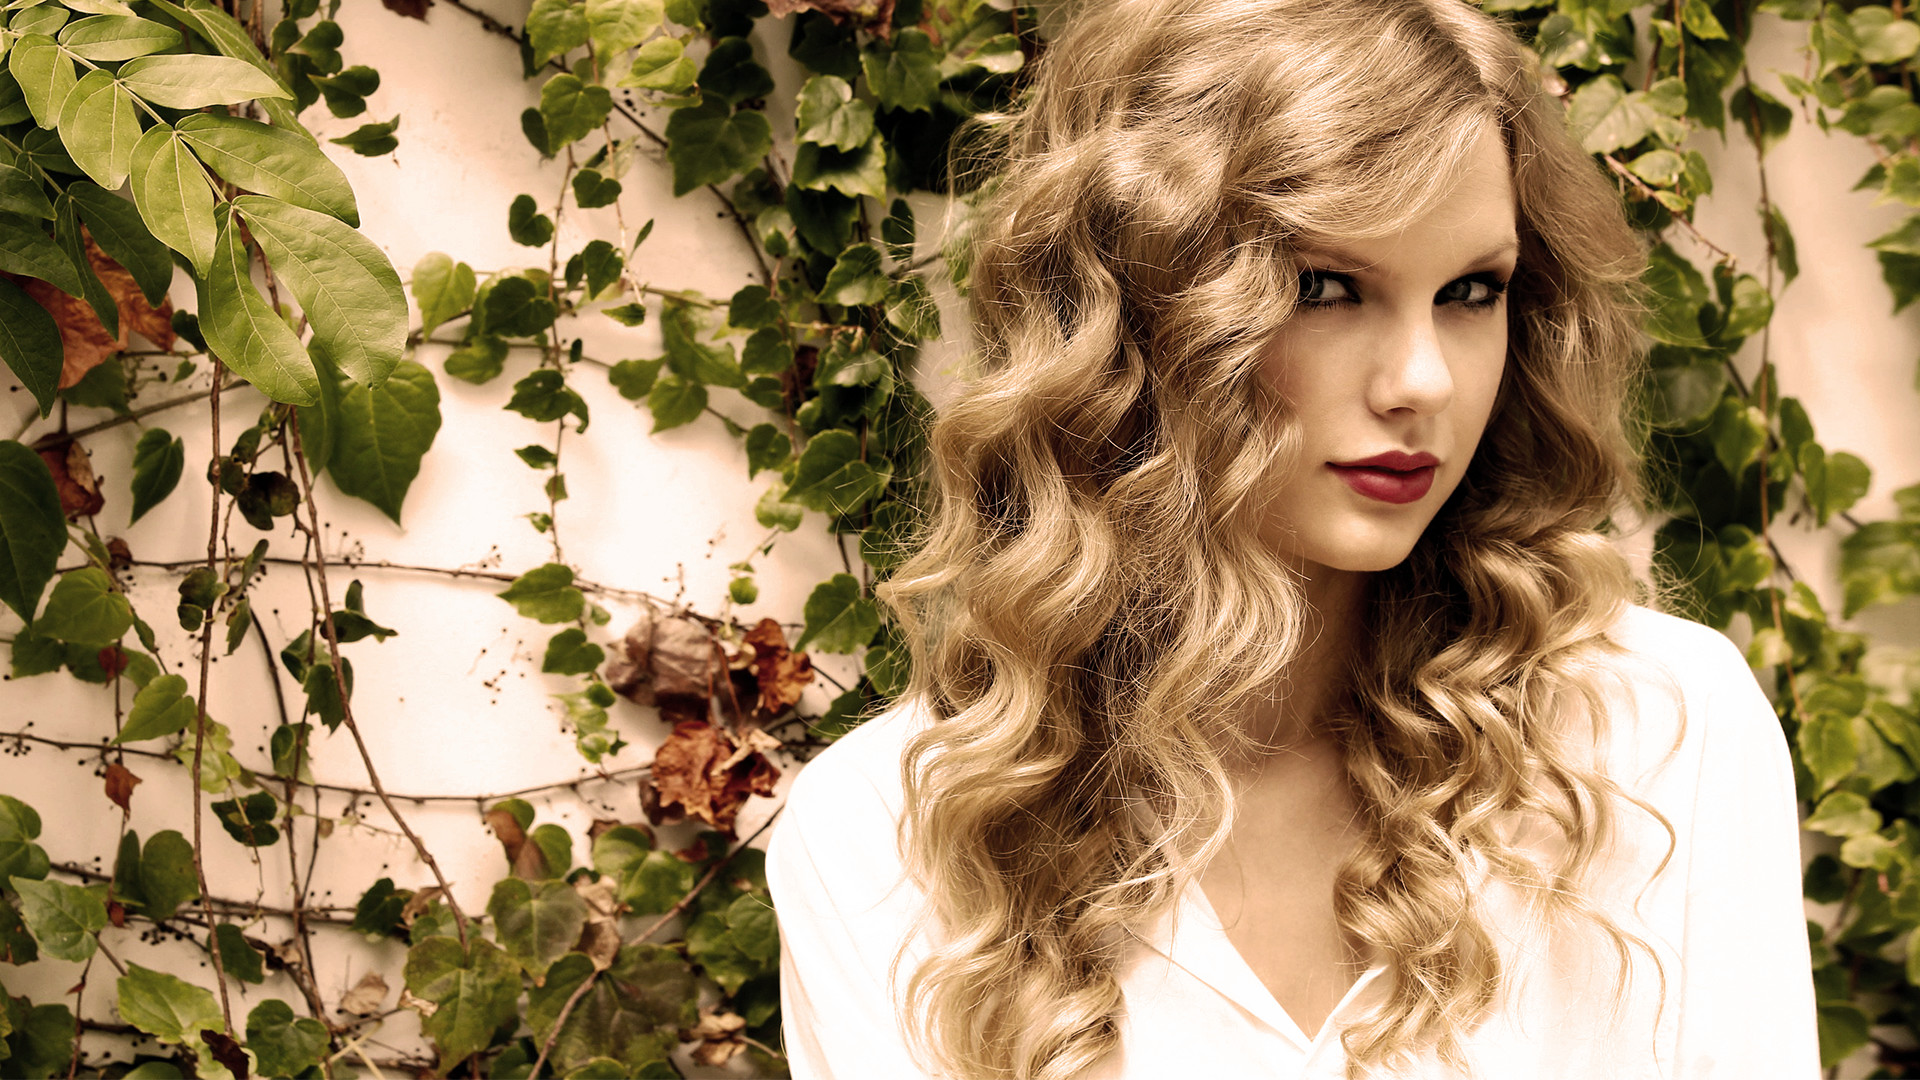 1920x1080 ... By Shantelle Sikorski - Taylor Swift Wallpapers,  px ...